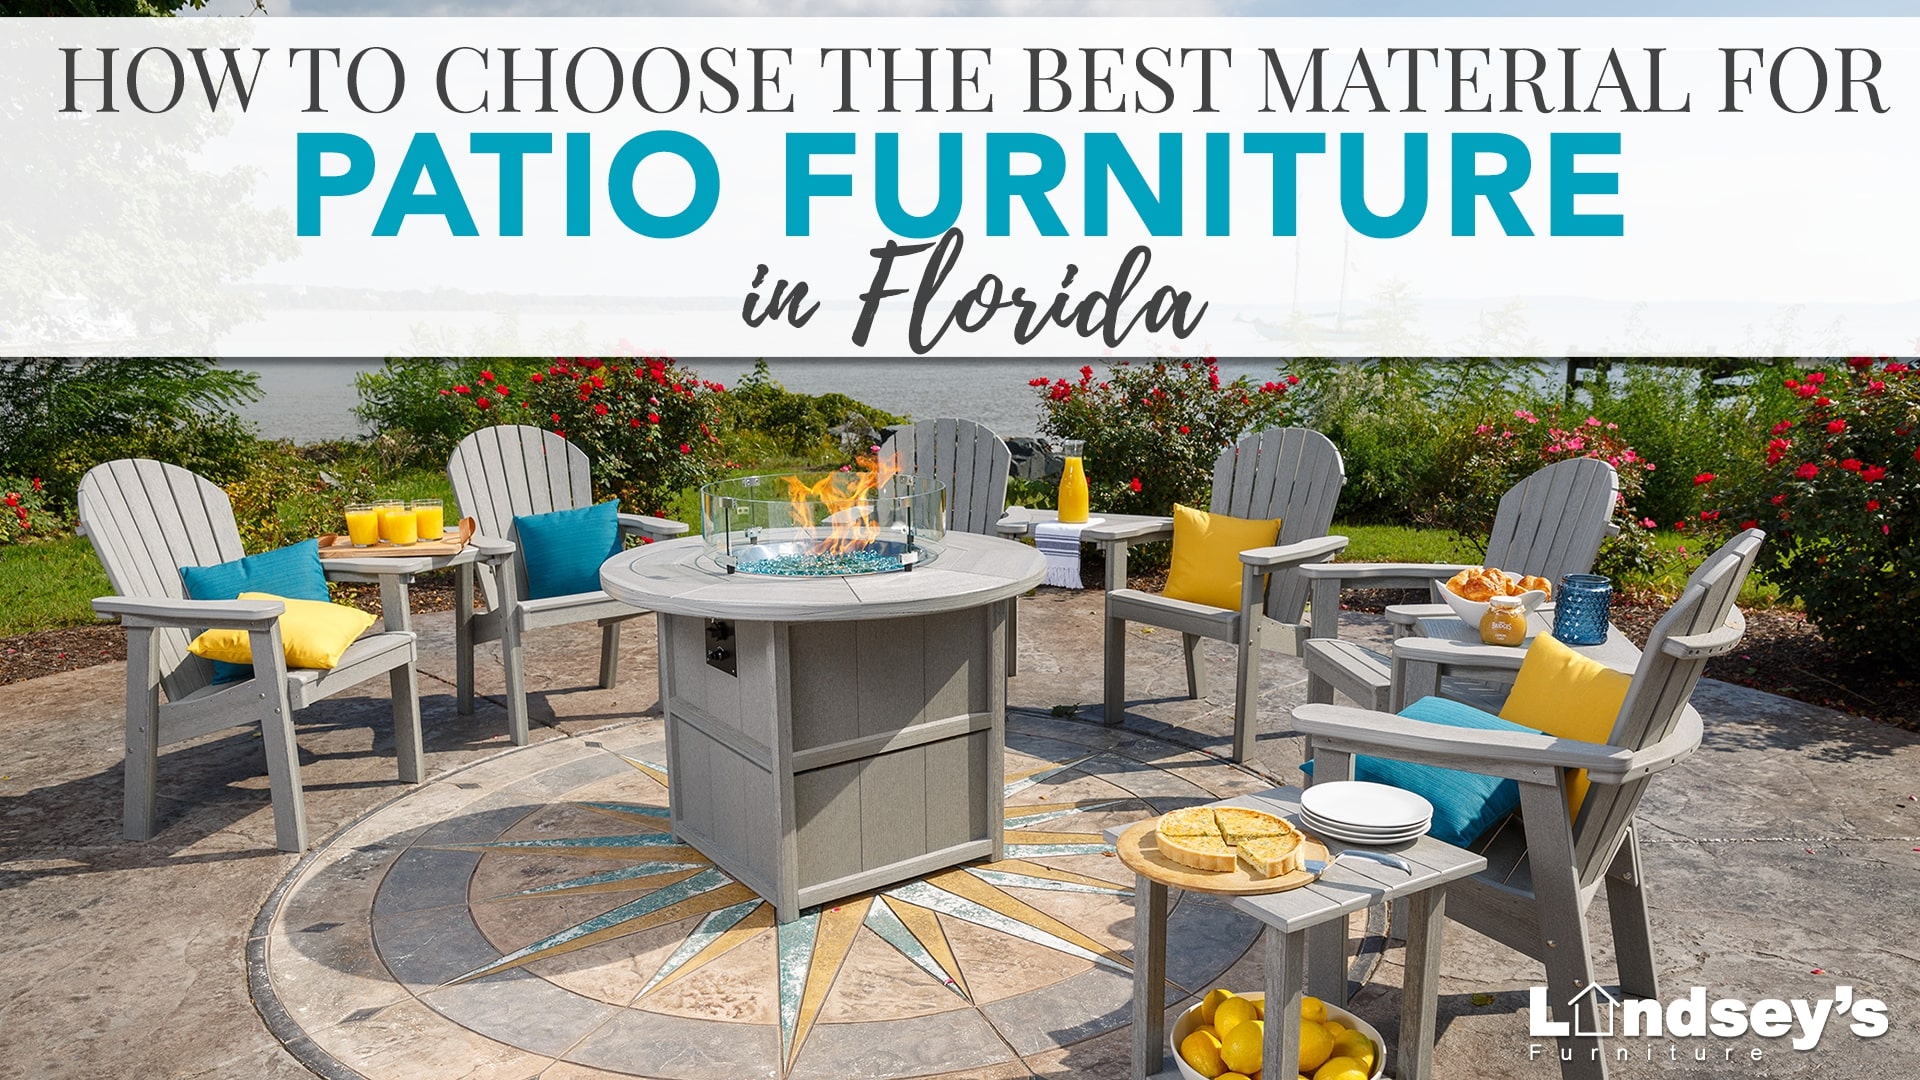 How to Choose the Best Material for Patio Furniture in Florida